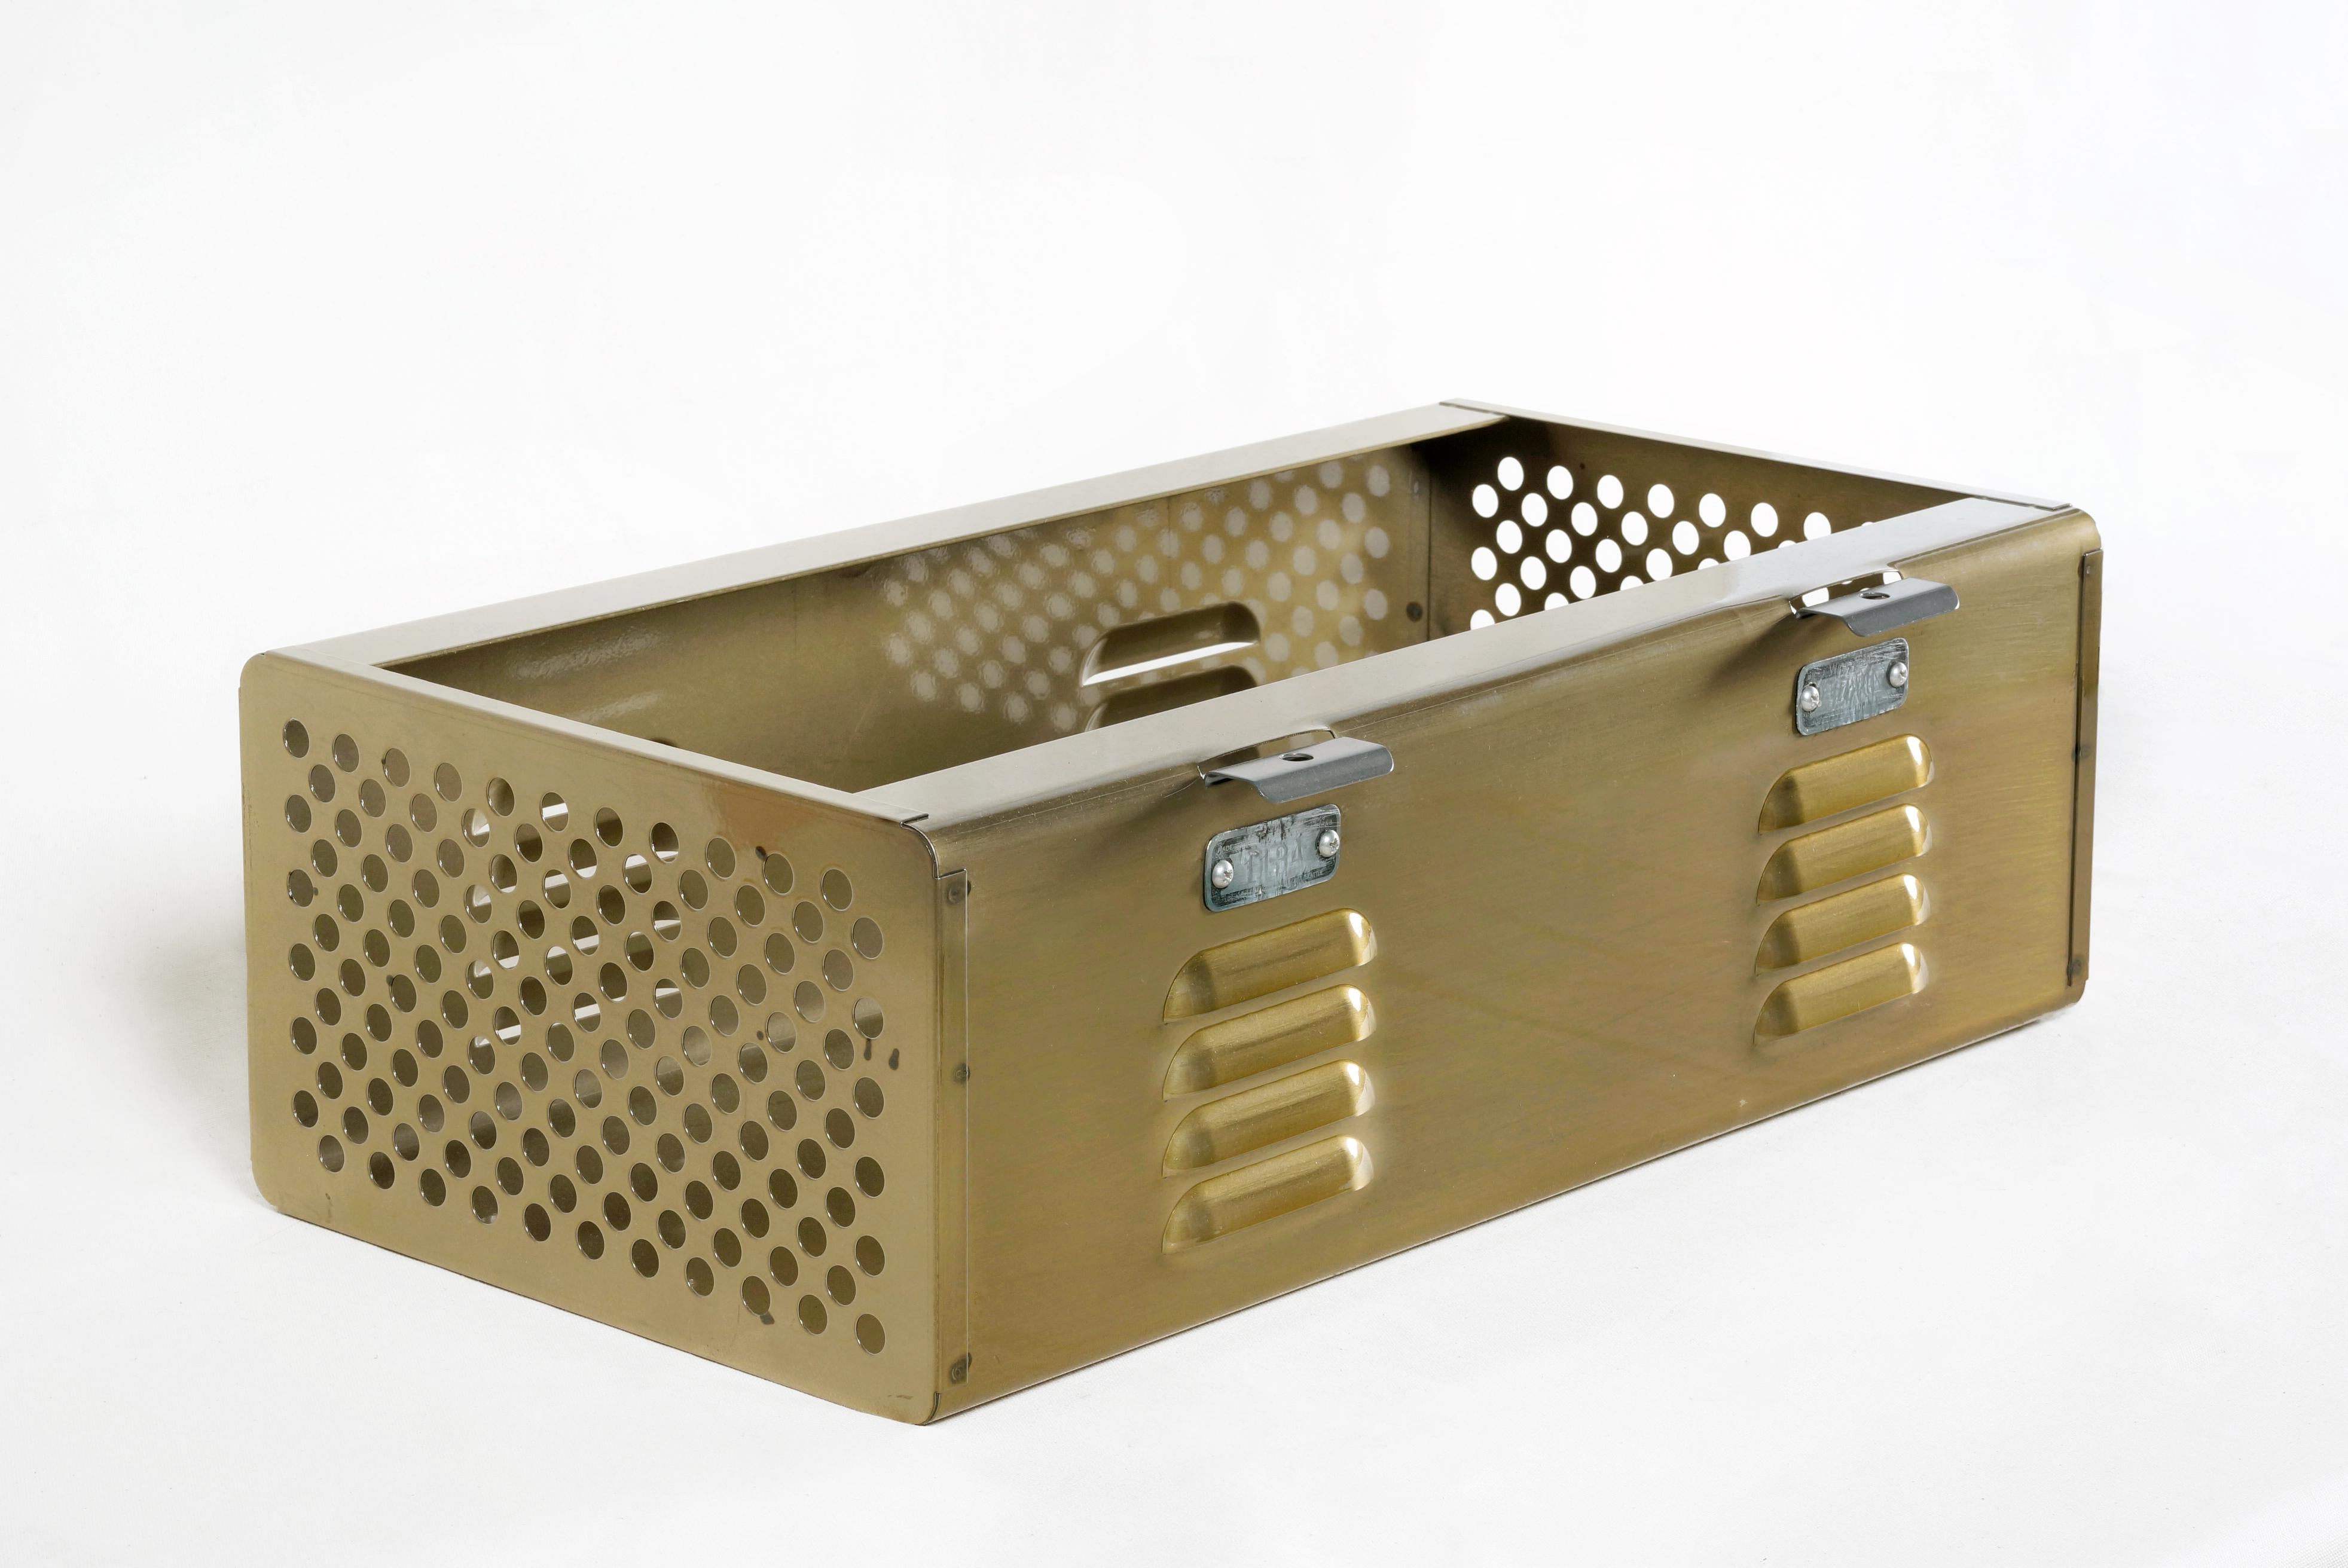 Our custom-made double wide locker baskets are inspired by an American varsity aesthetic of the 1950s-1960s. A creative storage piece well-suited for the kitchen, living room or studio alike. Baskets are newly made with vintage labels.

Pictures